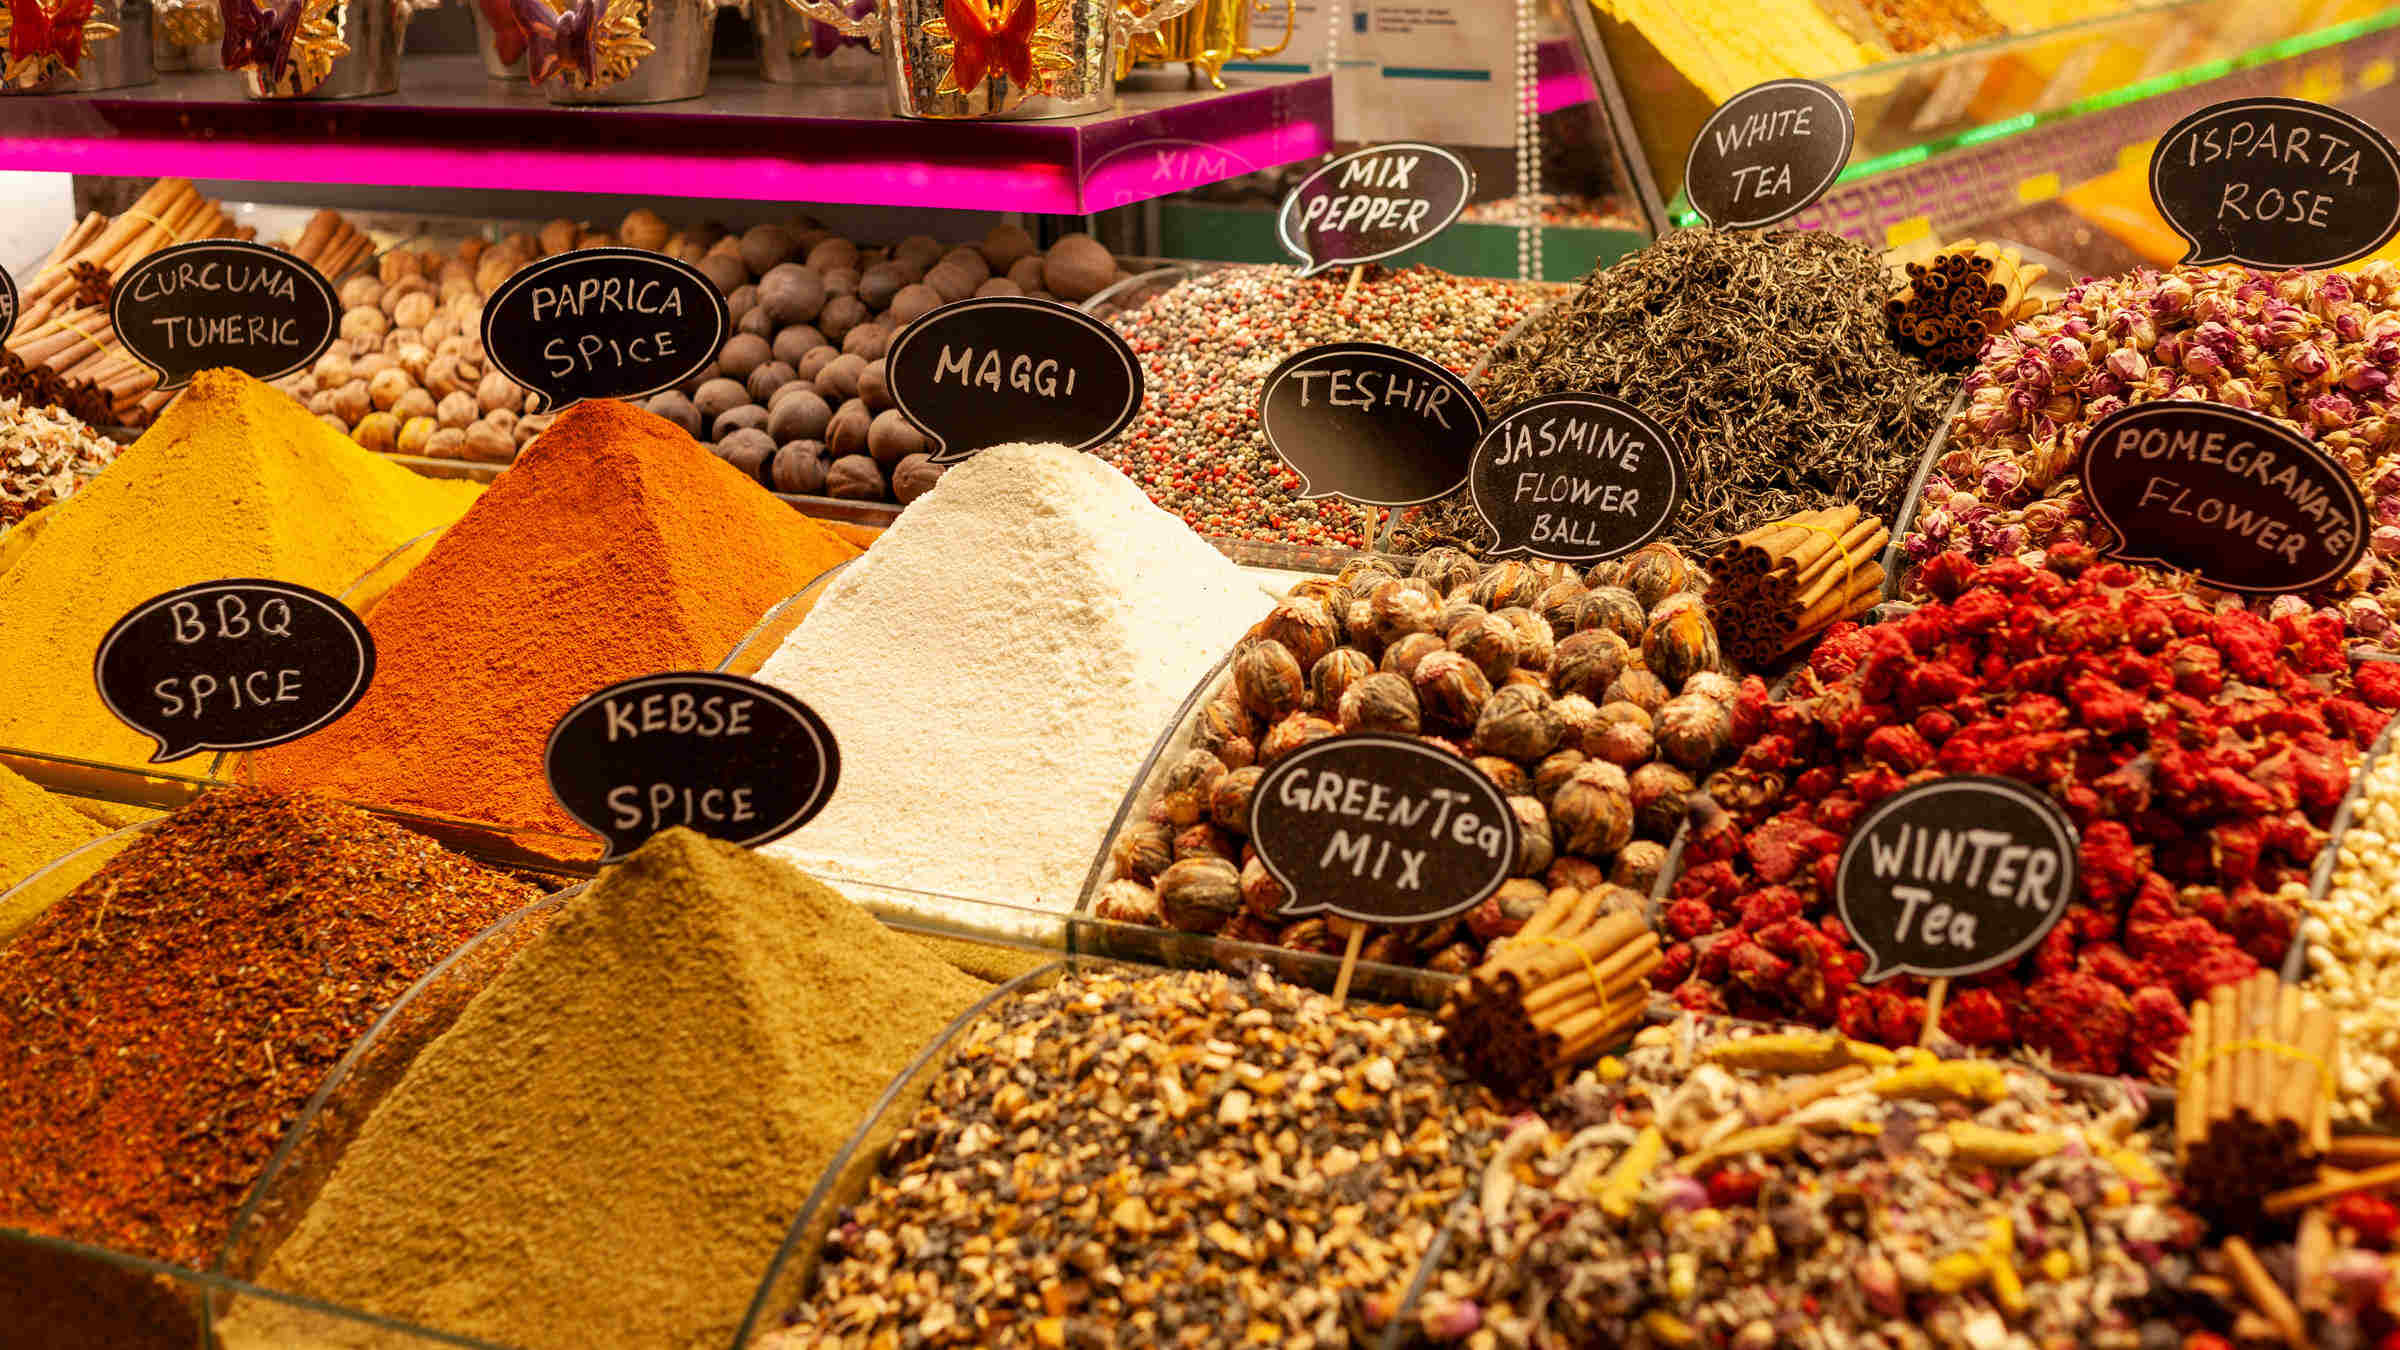 19-fascinating-facts-about-spice-bazaar-istanbul